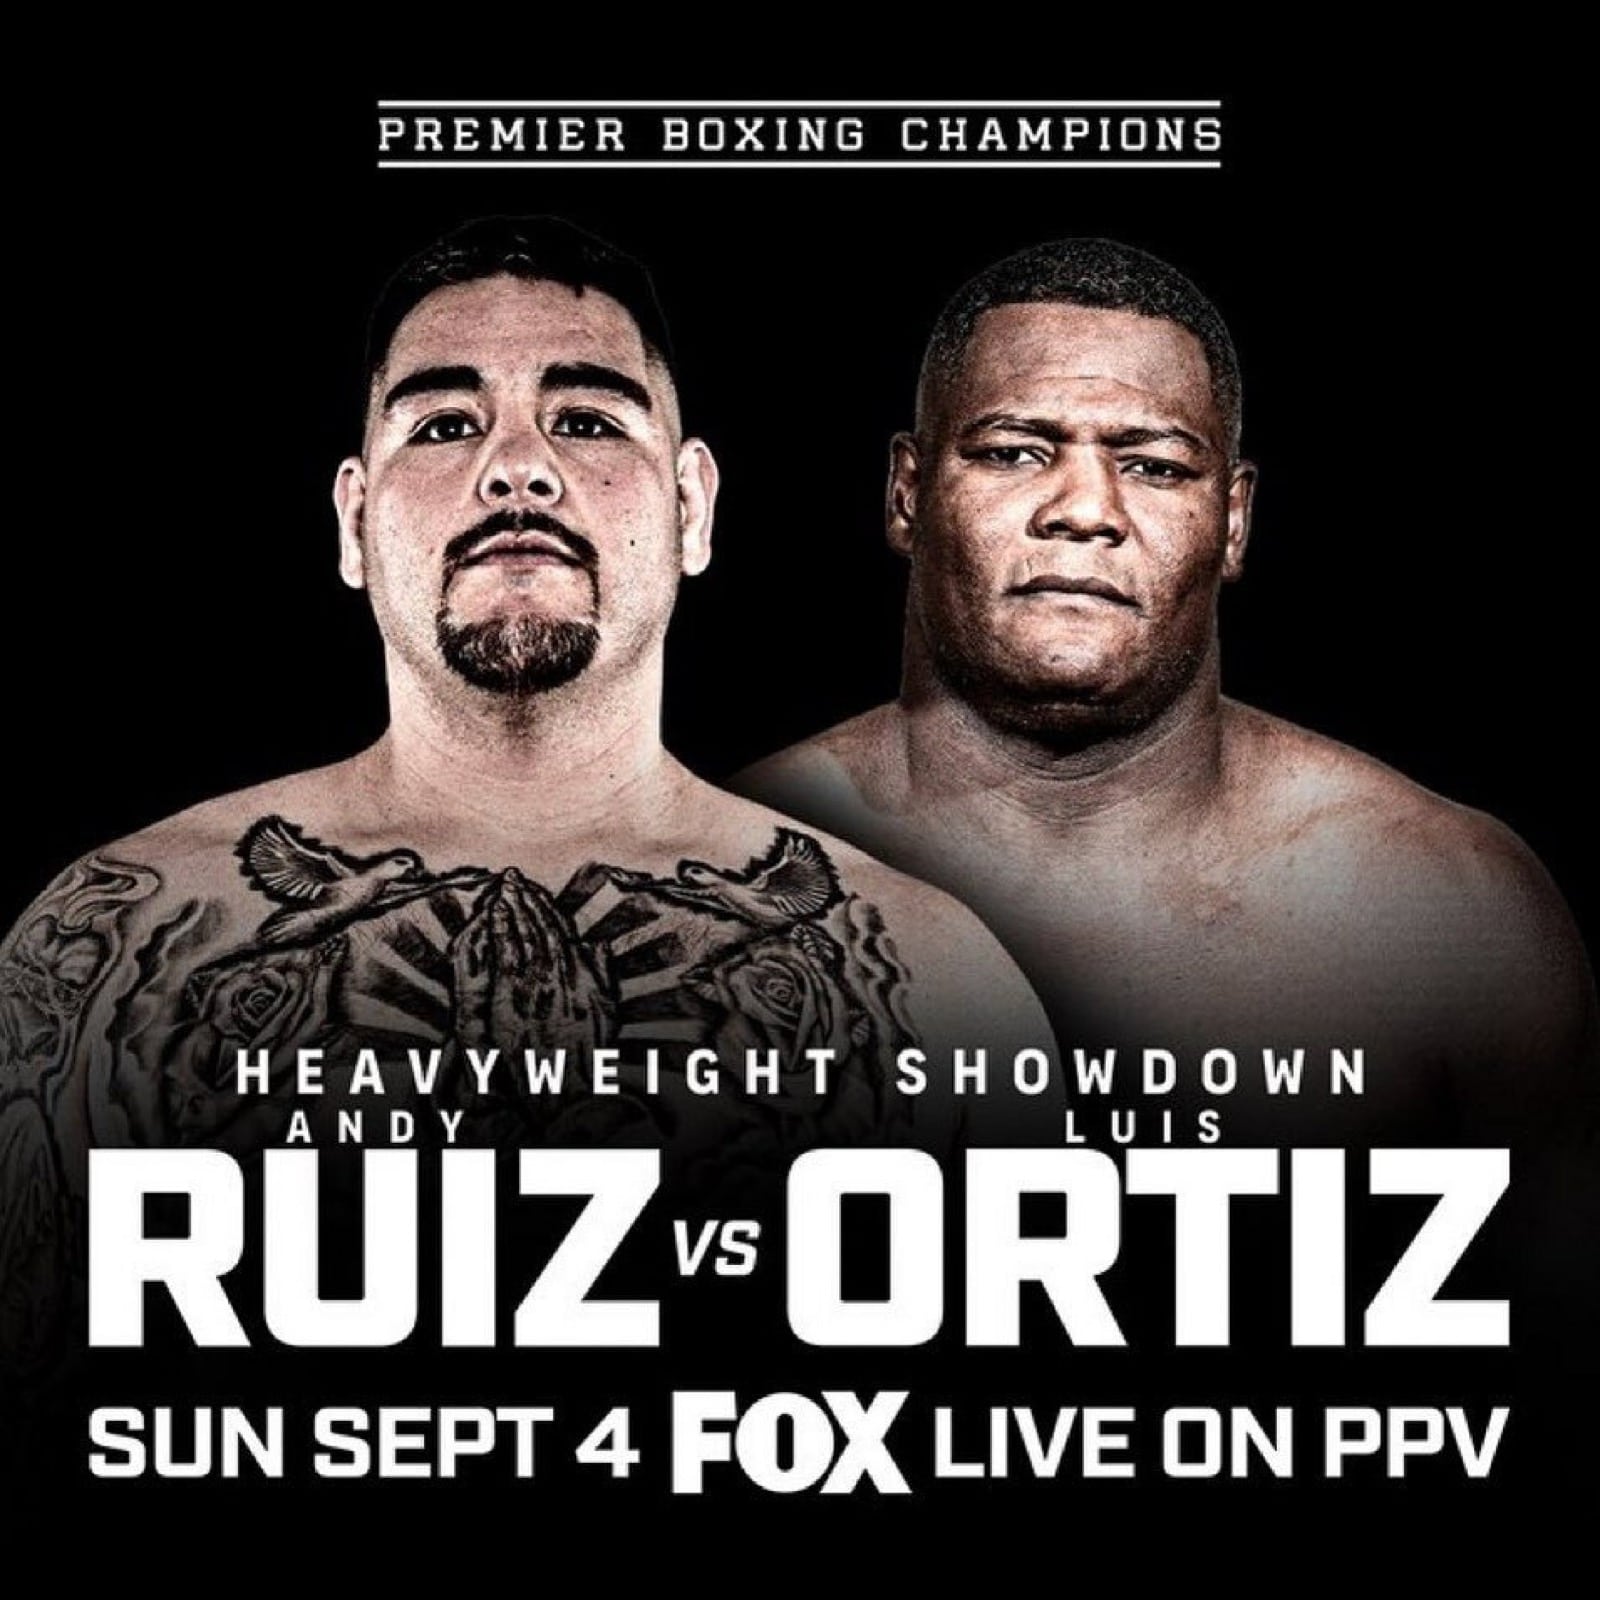 Image: Andy Ruiz Jr. says Luis Ortiz fight will show he's going to be heavyweight champion again